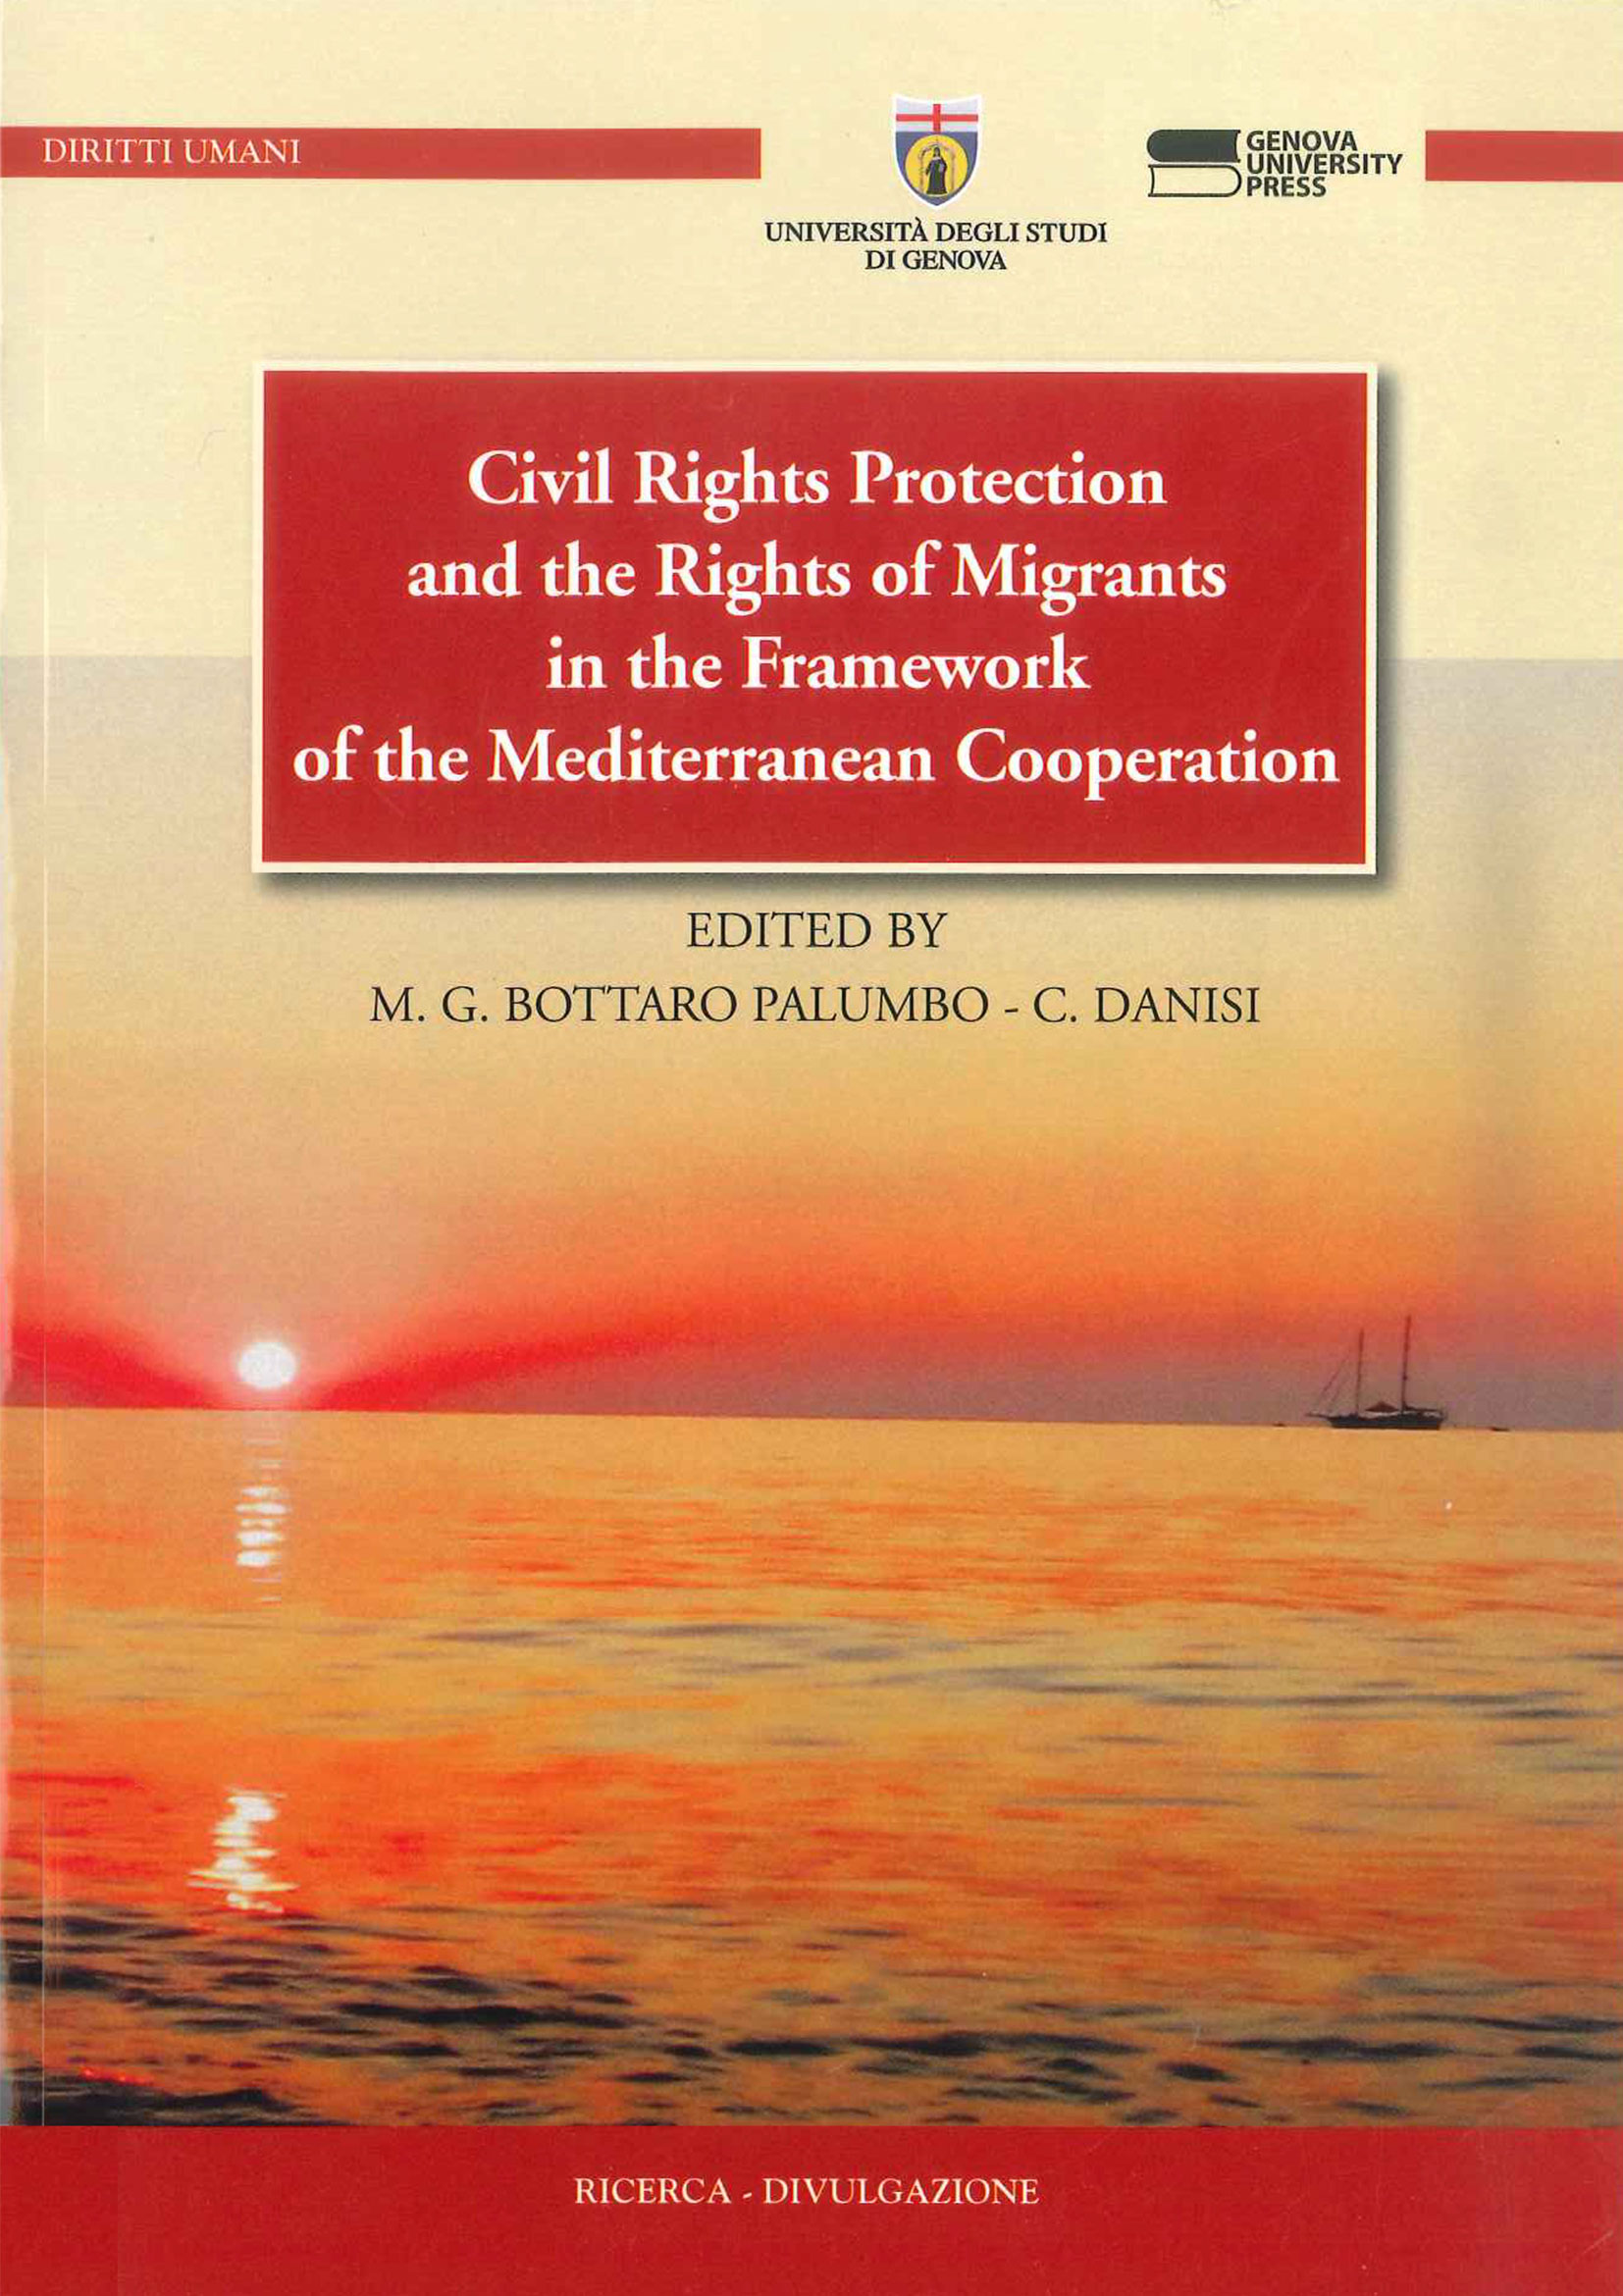 Civil Rights Protection and the Rights of Migrants in the Framework of the Mediterranean Cooperation